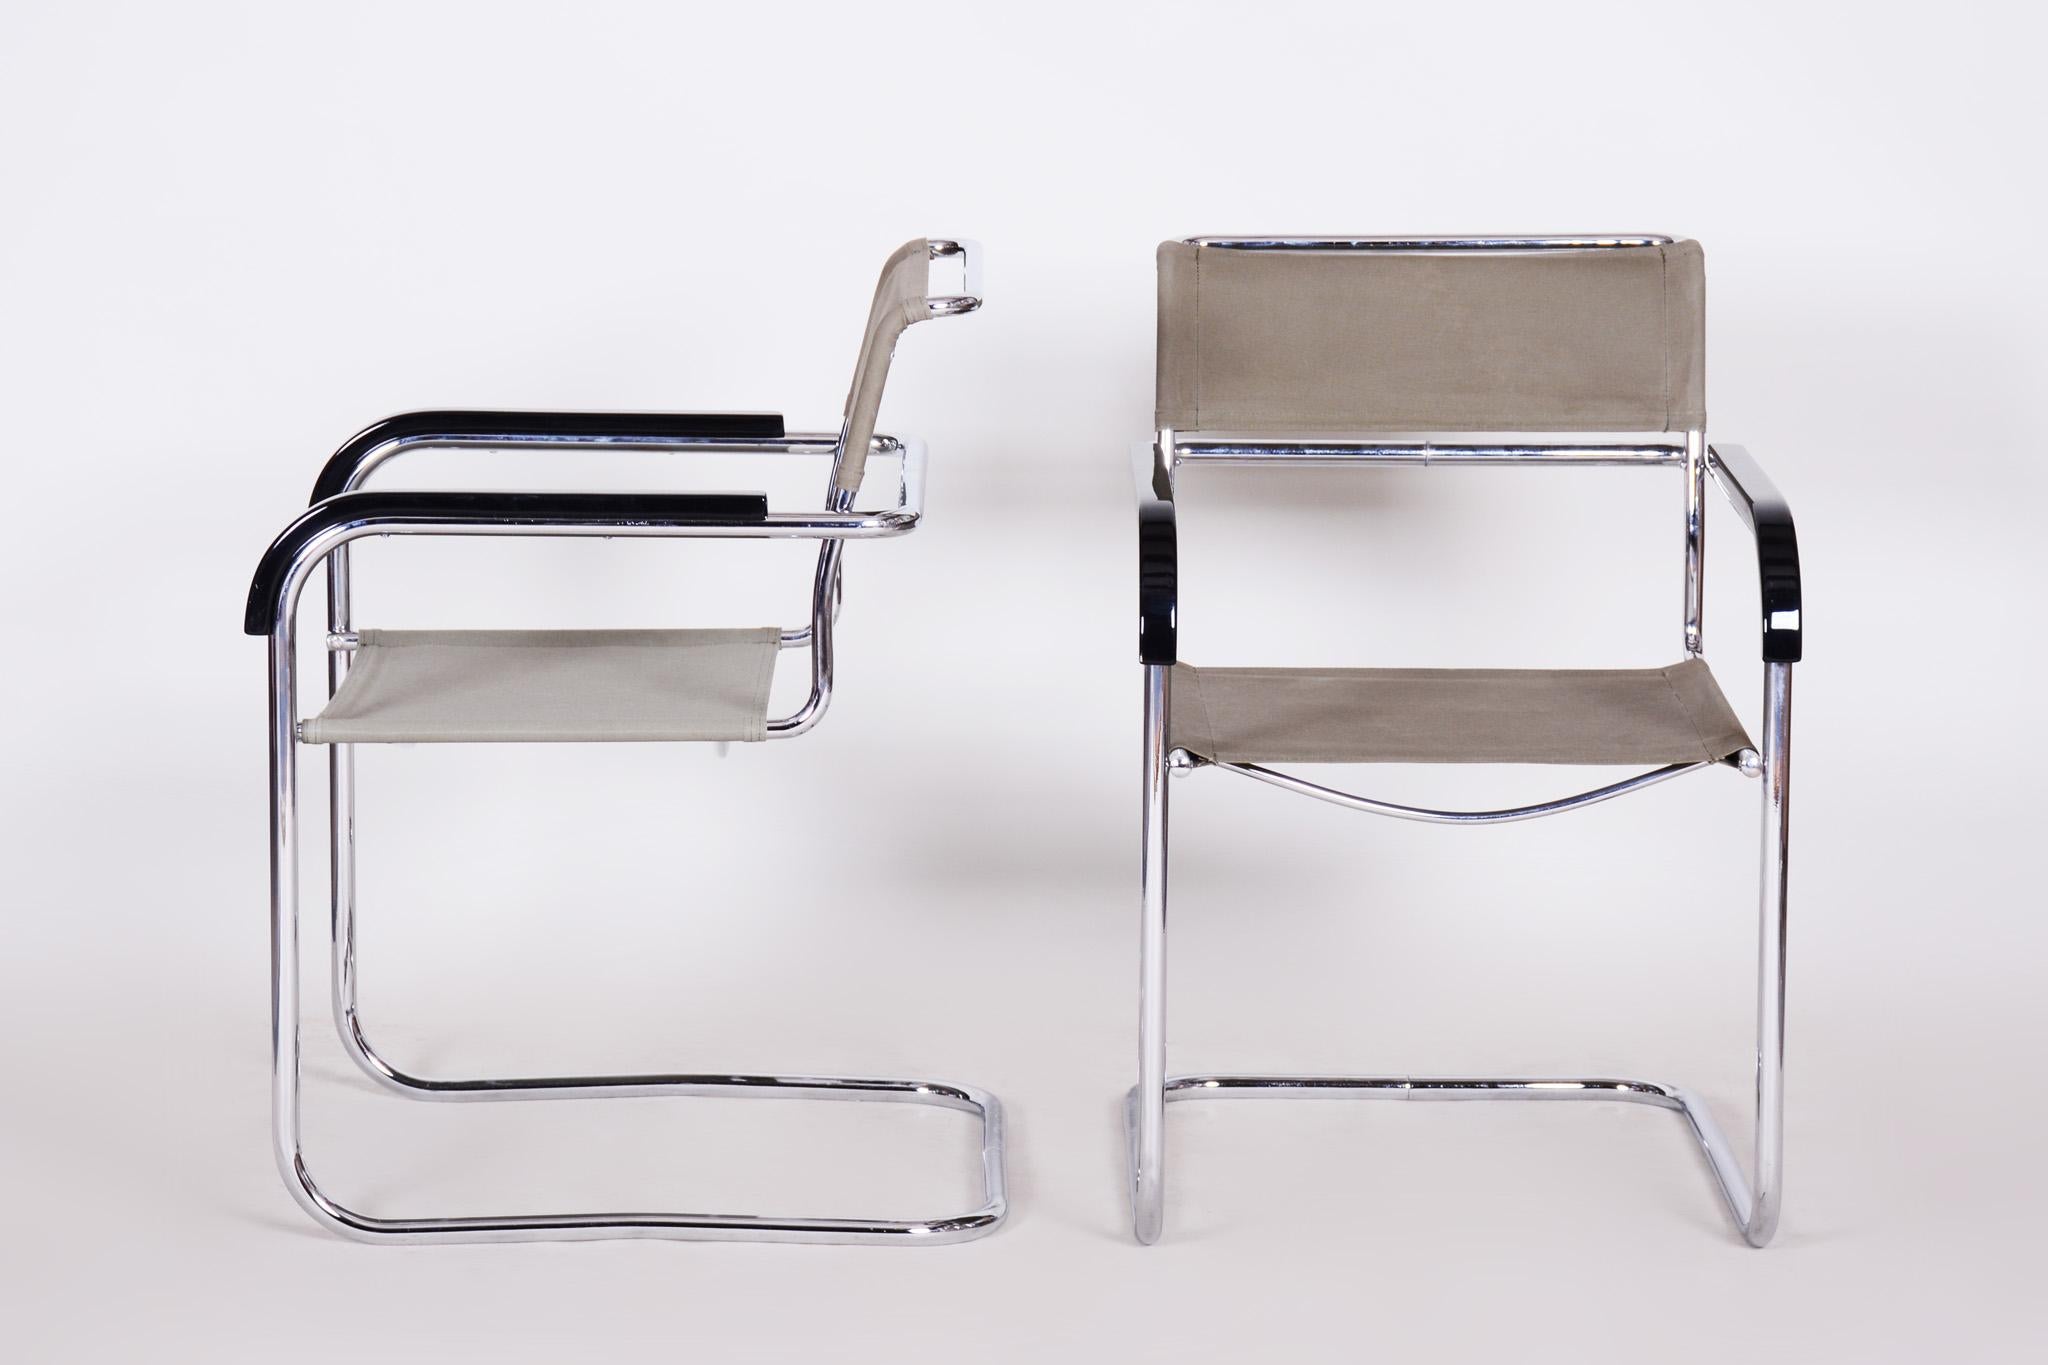 Pair of Czech Bauhaus Armchairs, Marcel Breuer and Thonet, Chrome, Fabric, 1930s In Good Condition For Sale In Horomerice, CZ